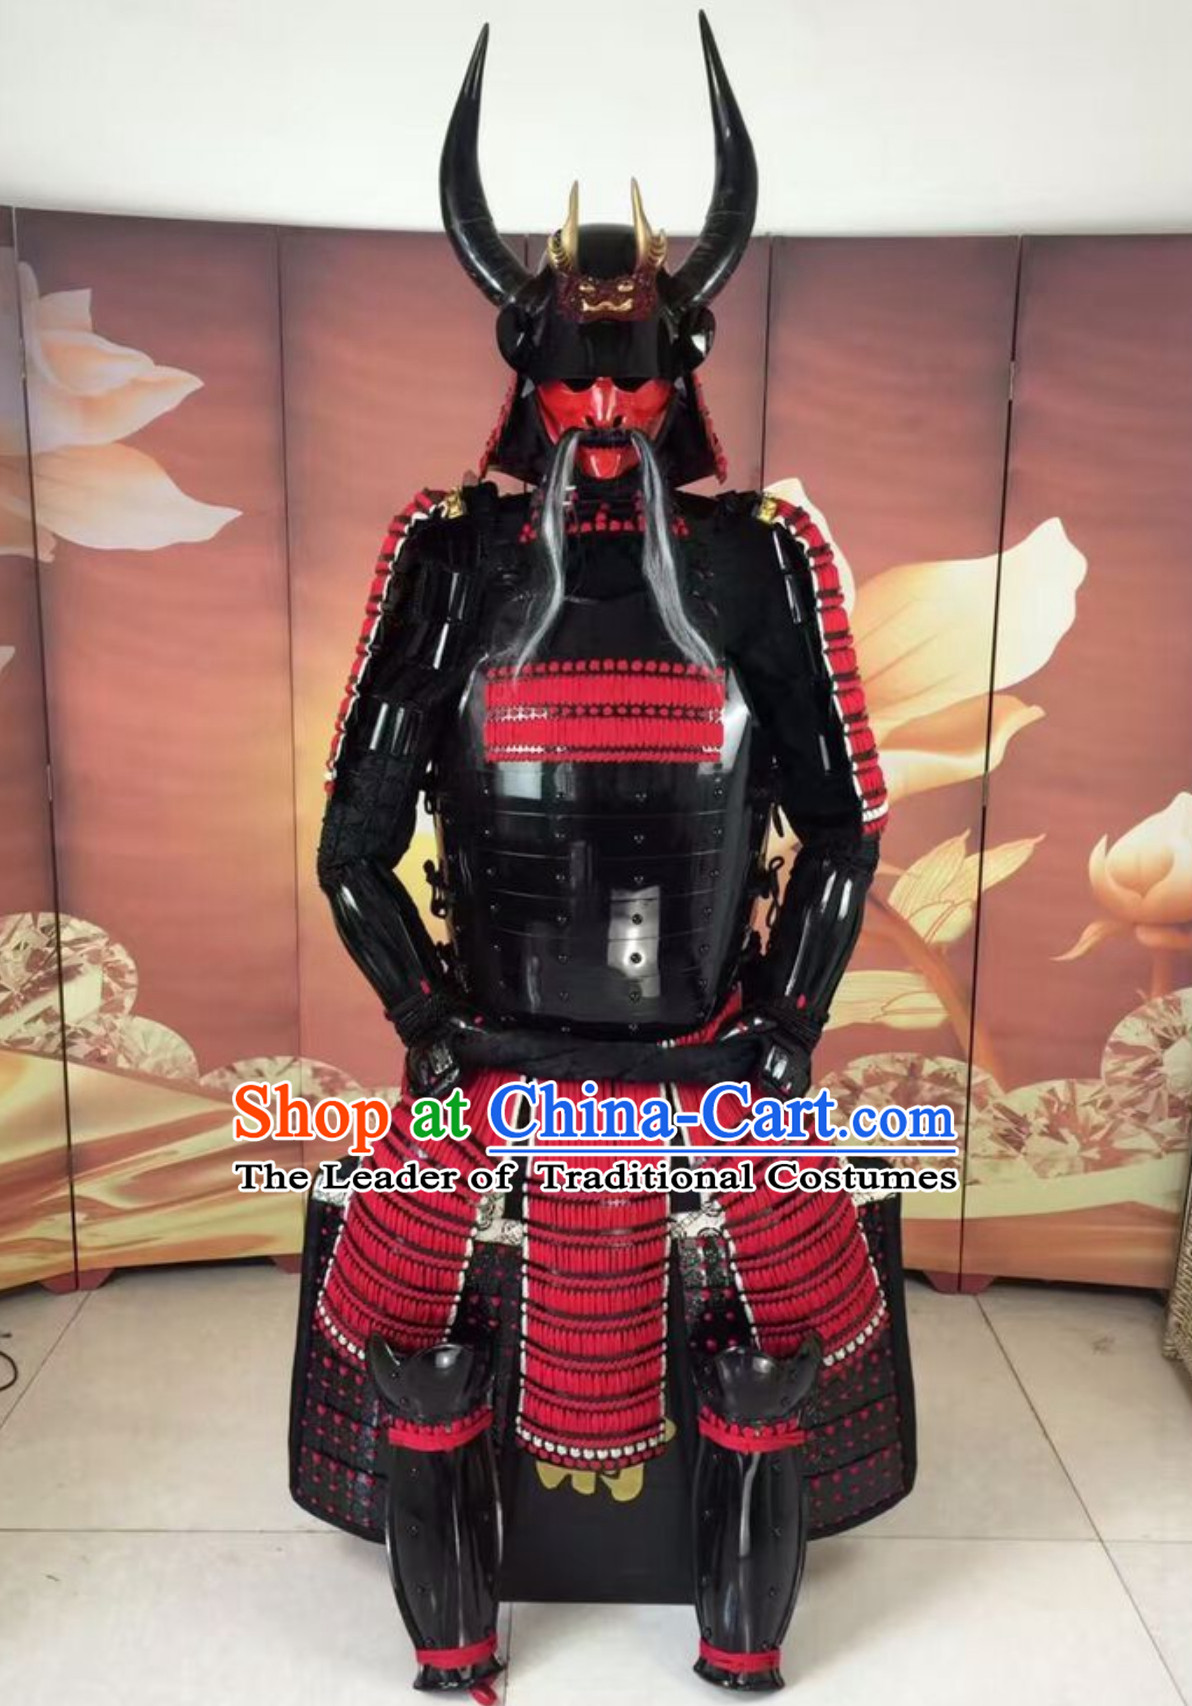 Ancient Authentic Japanese Samurai Armor Japanese Samurai Body Armor Custom Japanese Samurai Armor Mask and Body Armors Complete Set